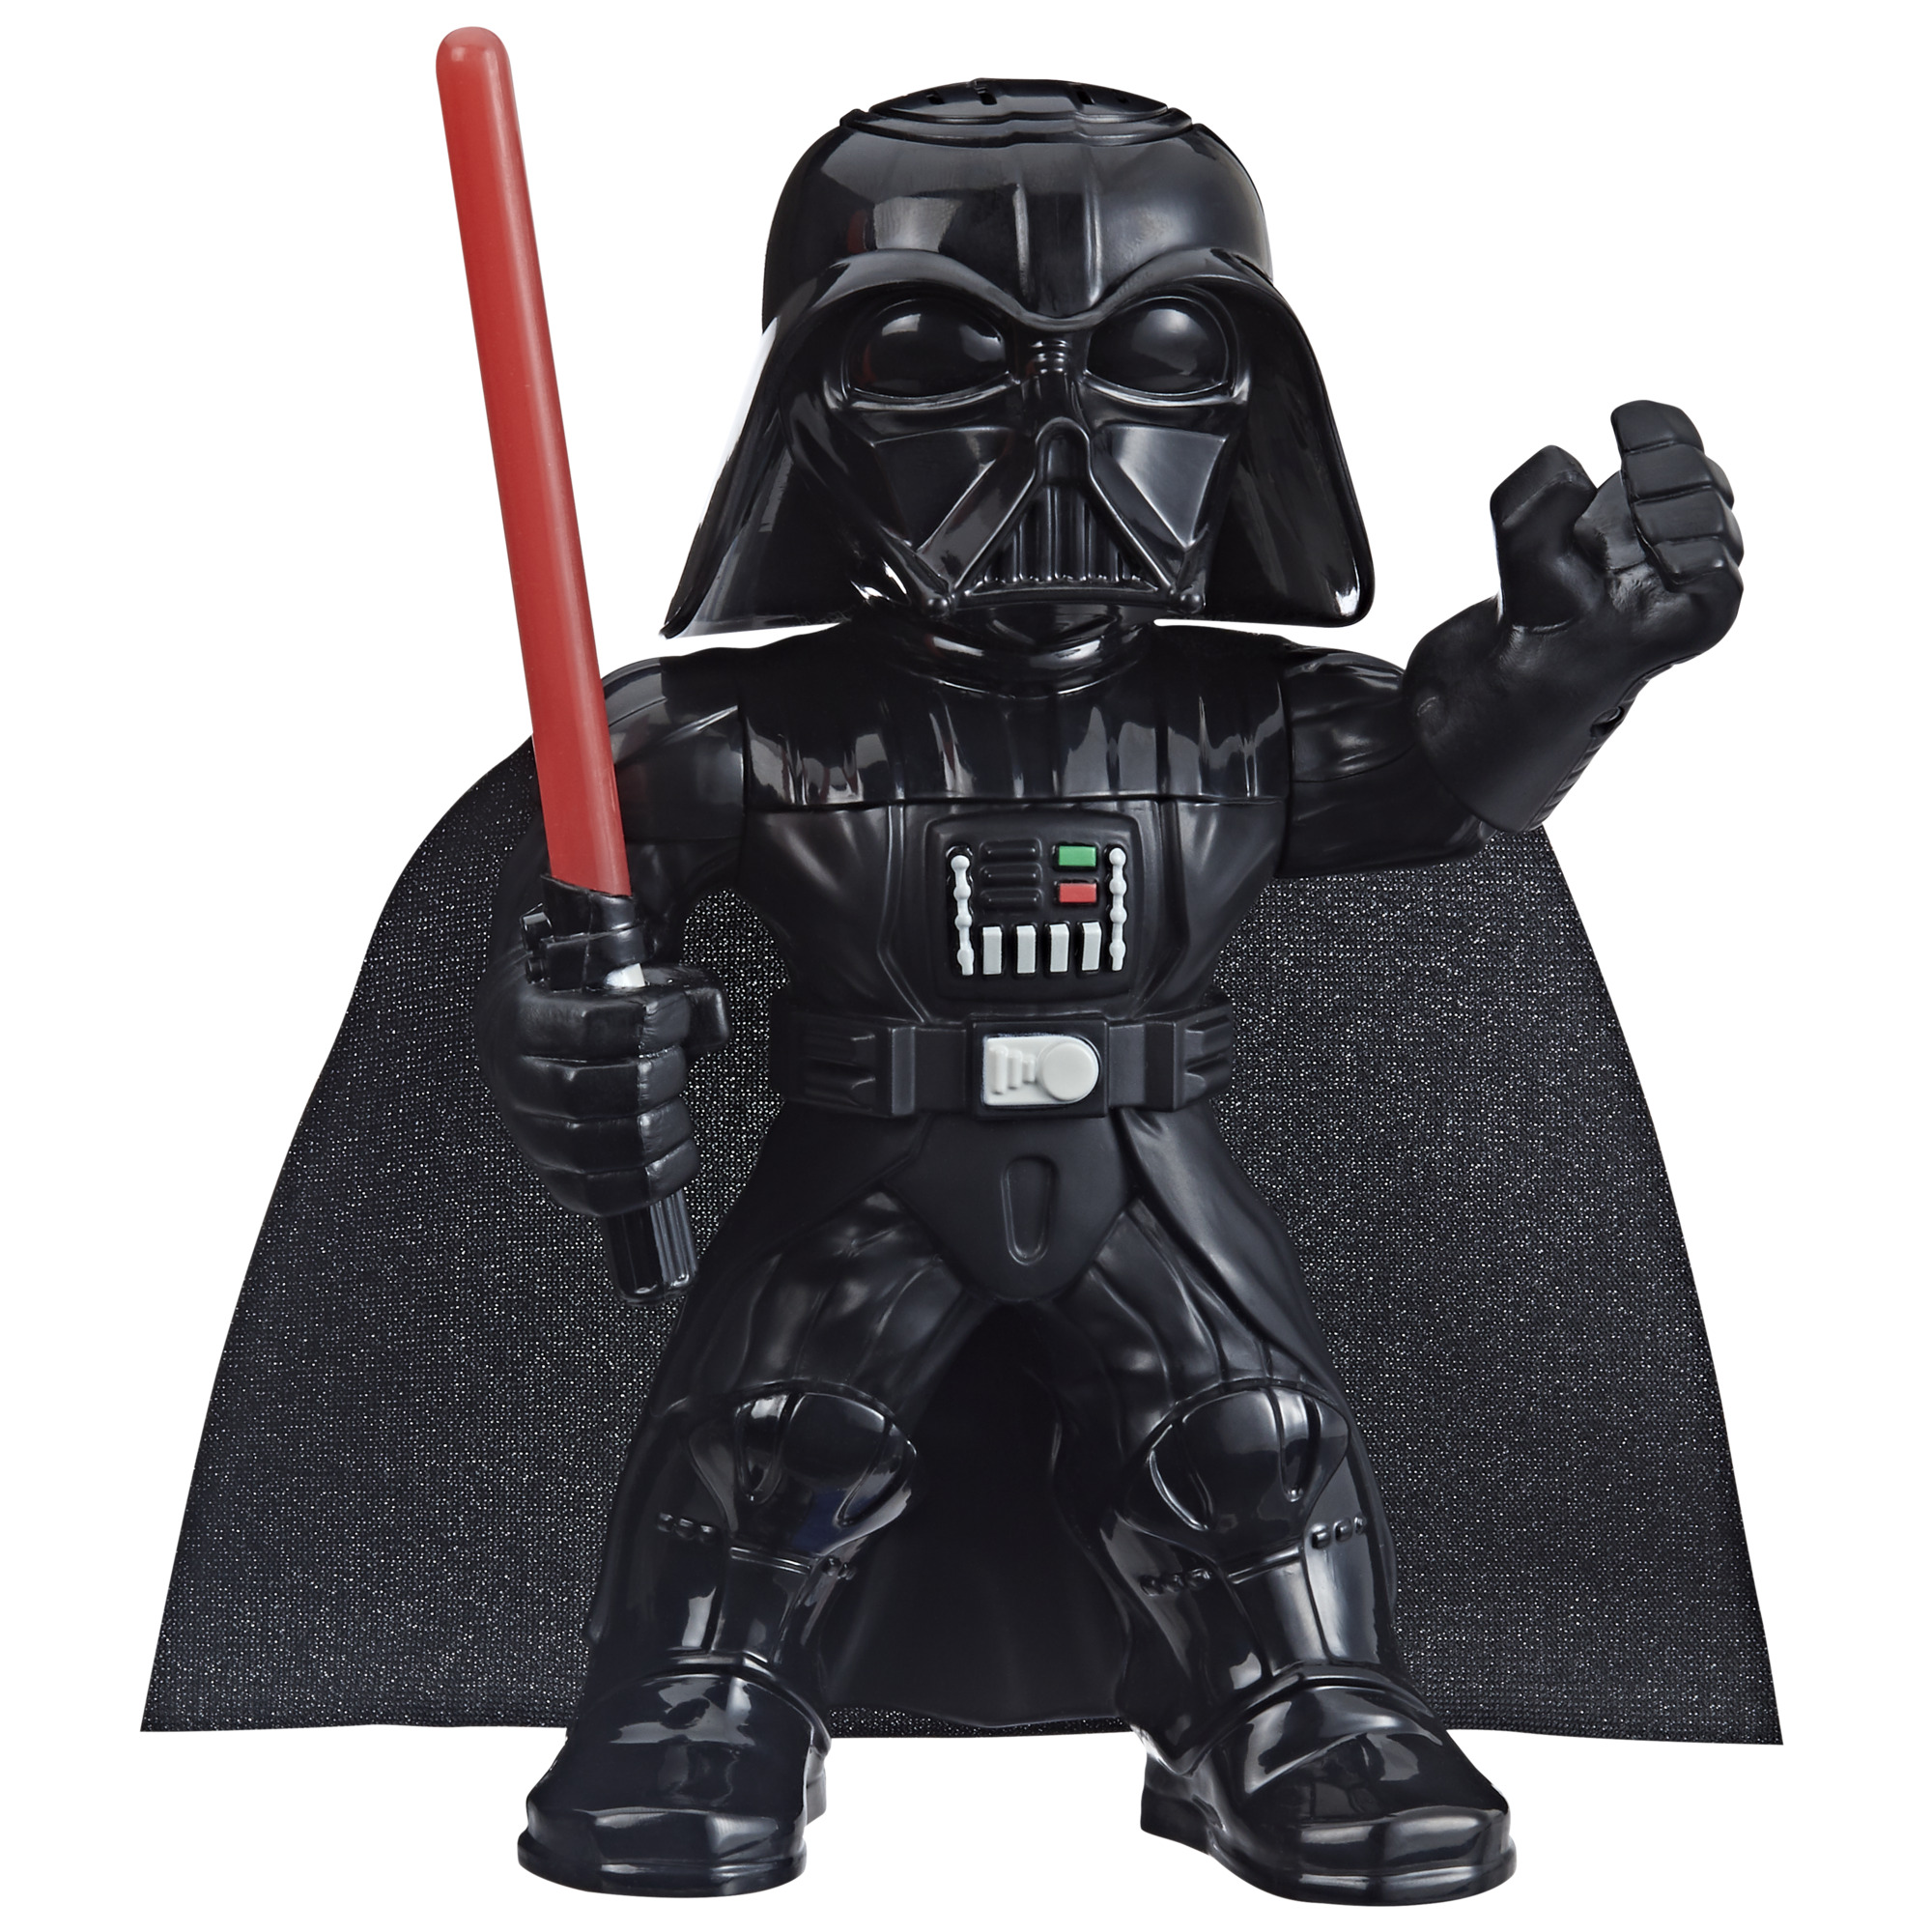 Bop It! Star Wars Darth Vader Edition Game, Features the Voice of Emperor Palpatine, Ages 8 and Up, Only At Walmart - image 2 of 5